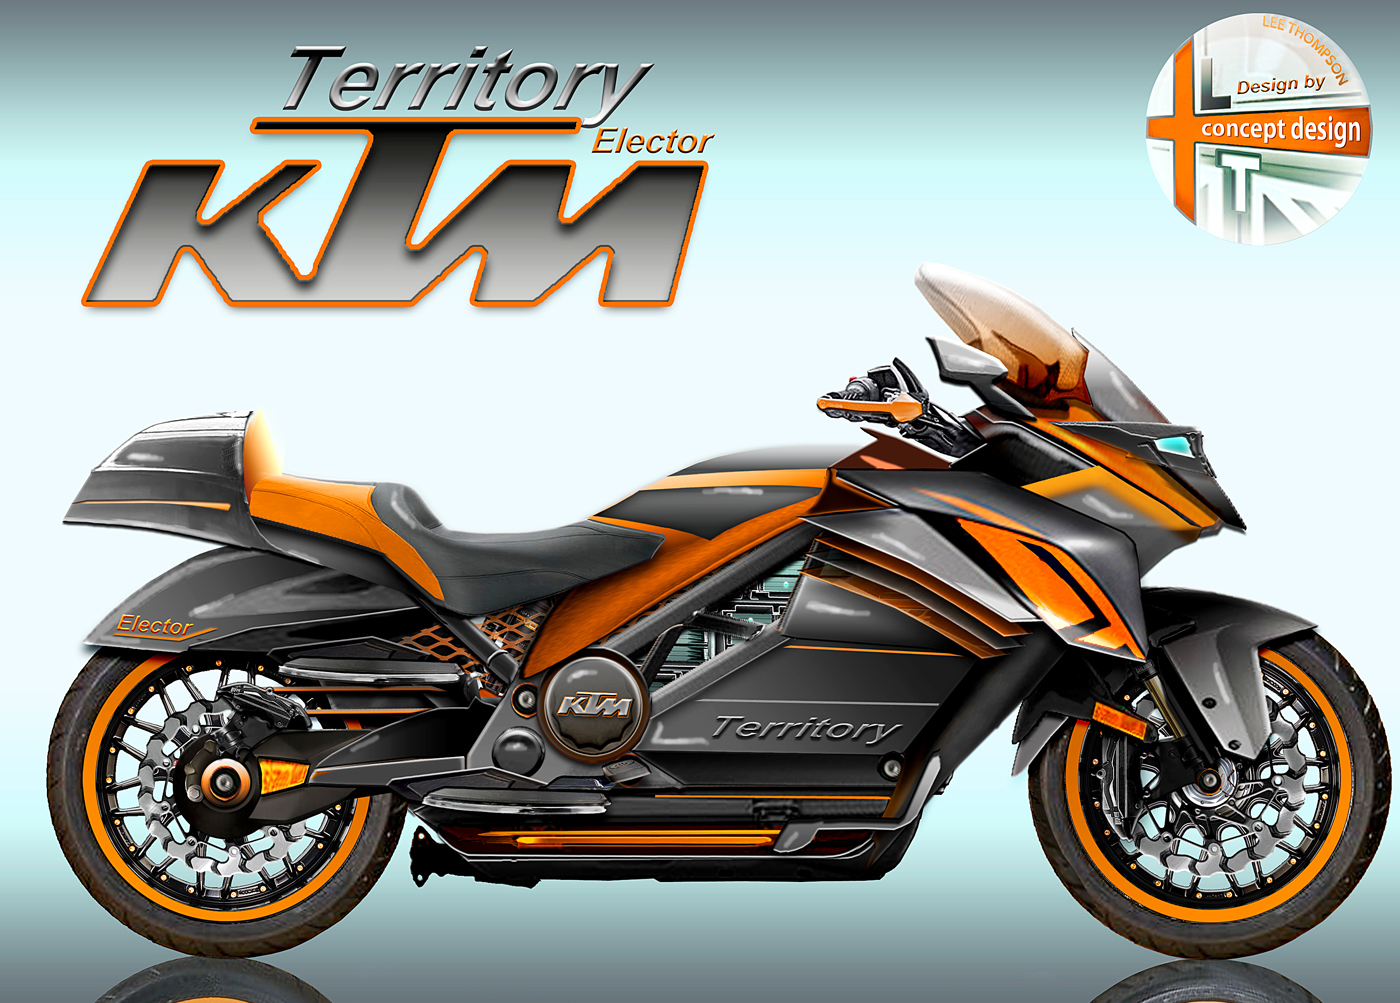 KTM concept motorcycle electric motorcycle ambassador motorcycle illustration Automotive design Touring Motorcycles